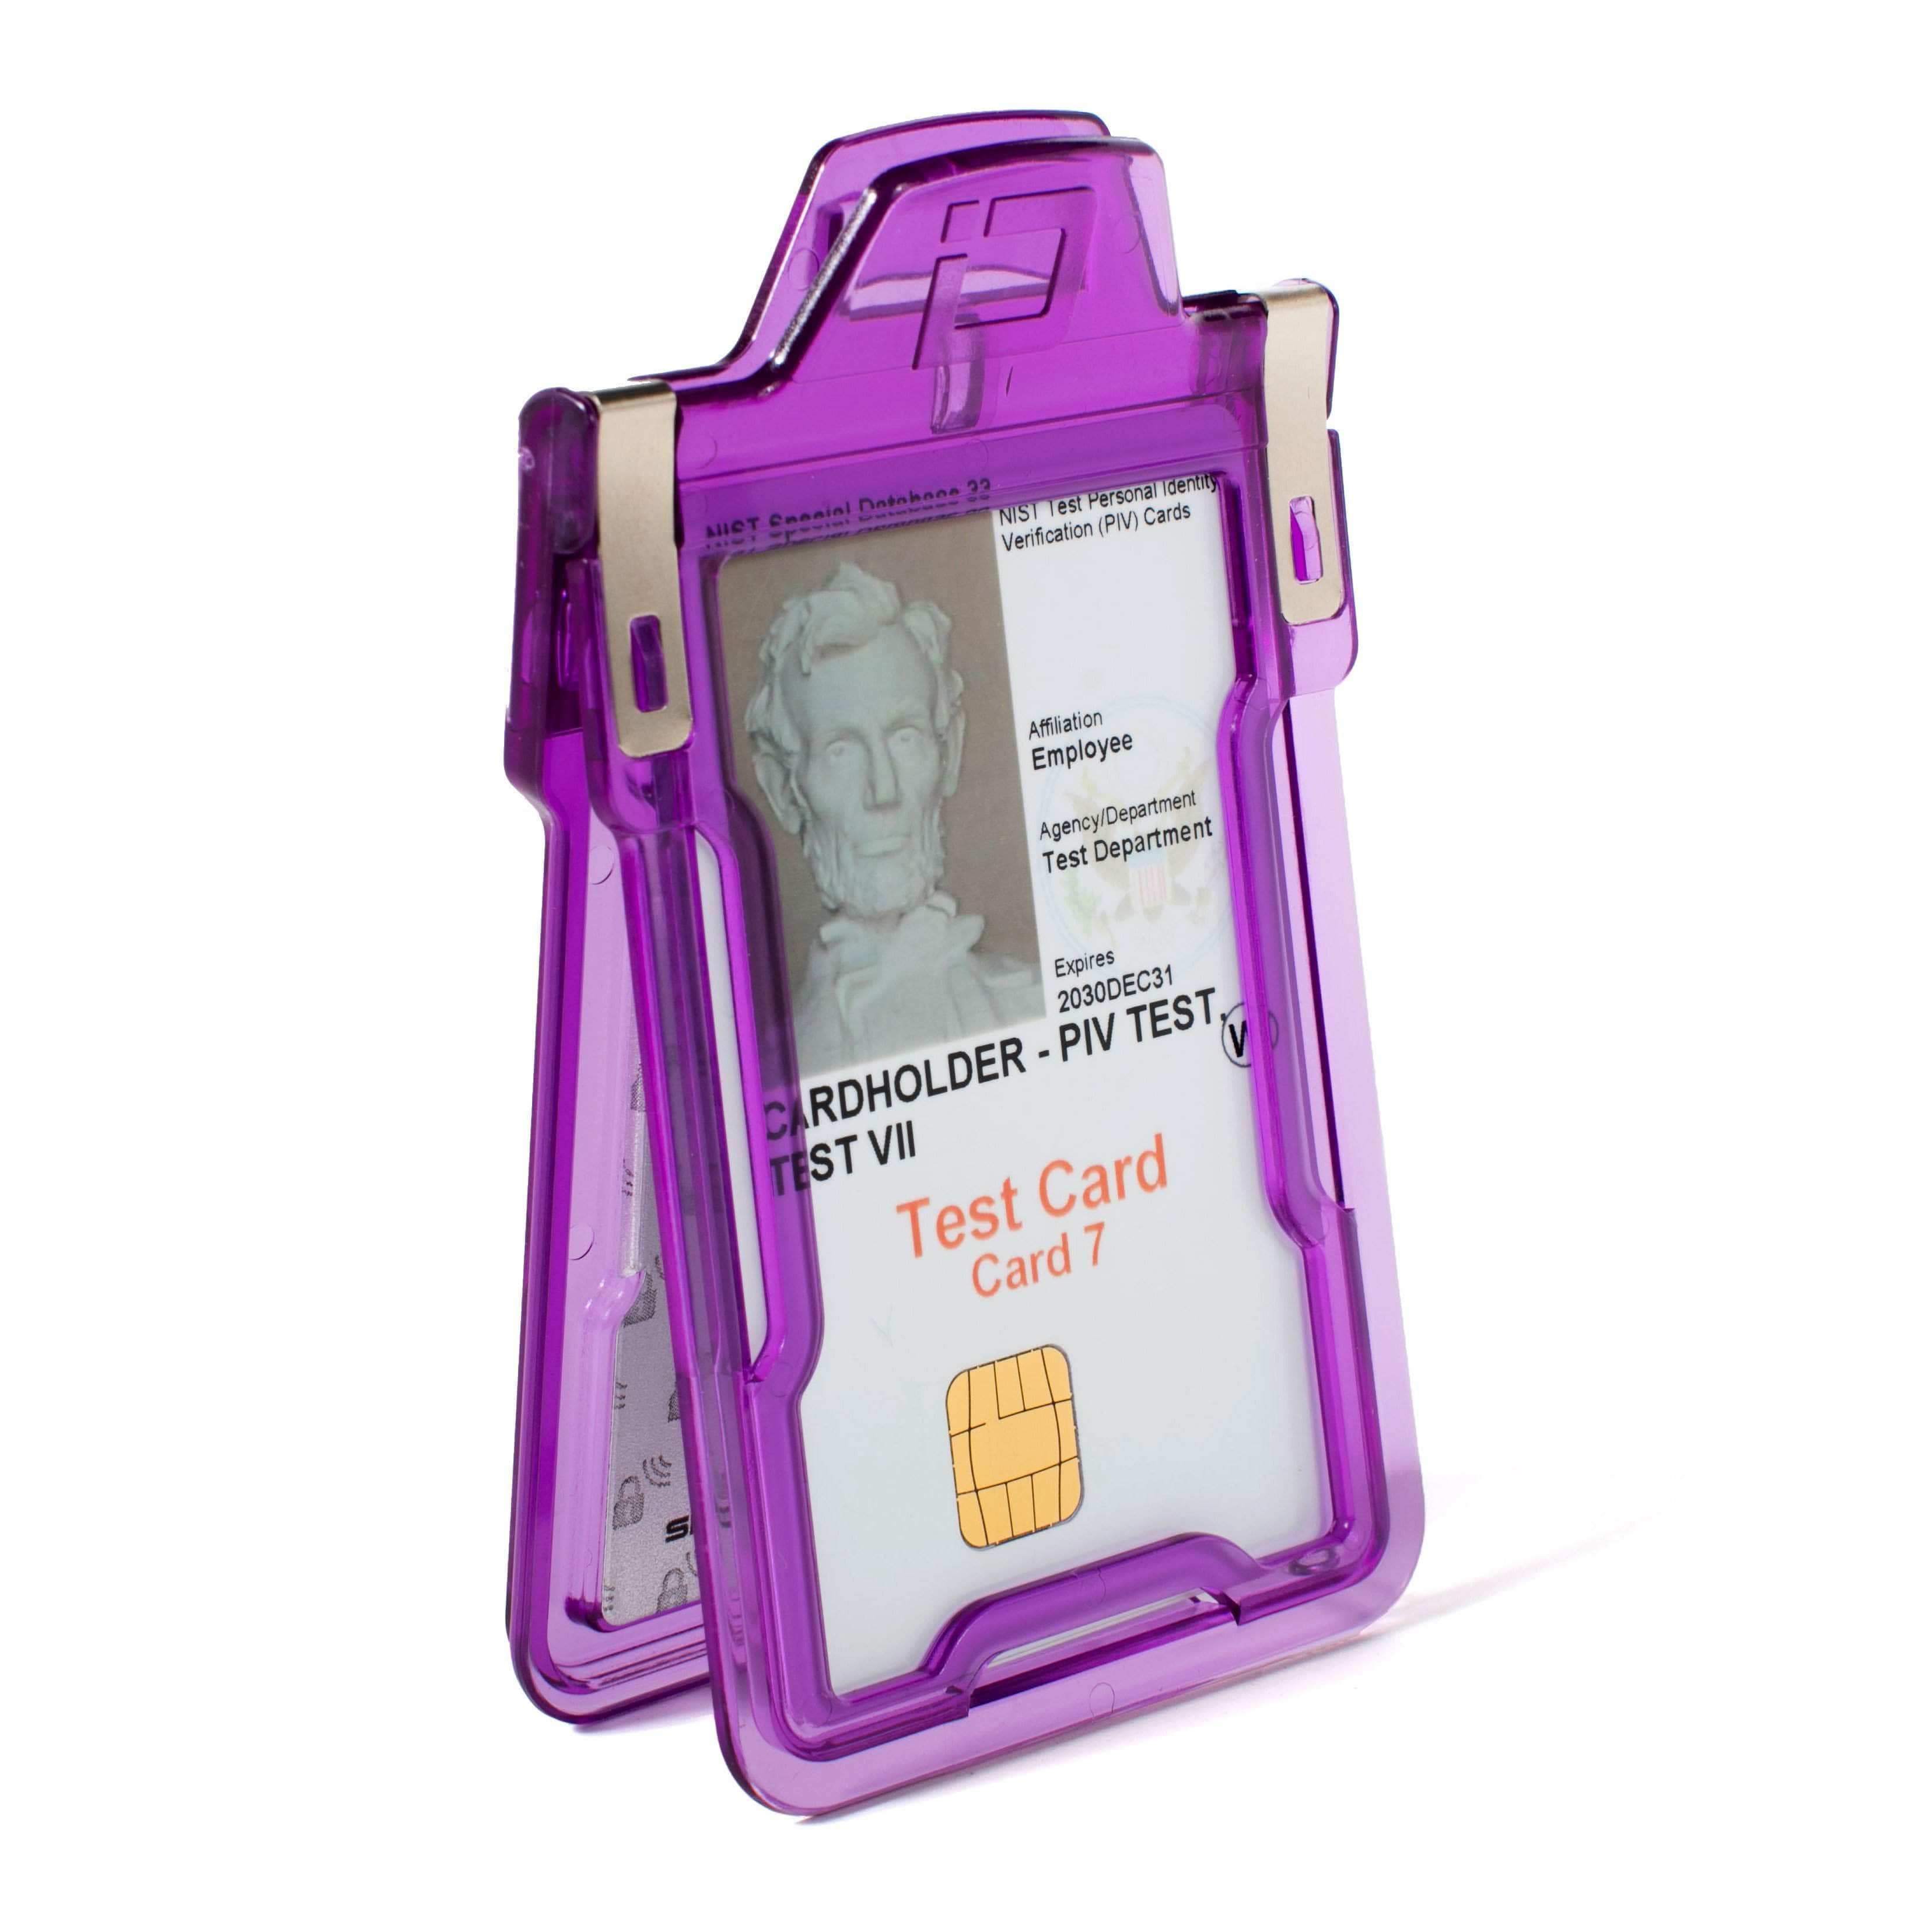 ID Stronghold Badgeholder BloxProx Purple Secure Badge Holder with BloxProx™ - Protects 125Khz HID Prox 1 Card Holder